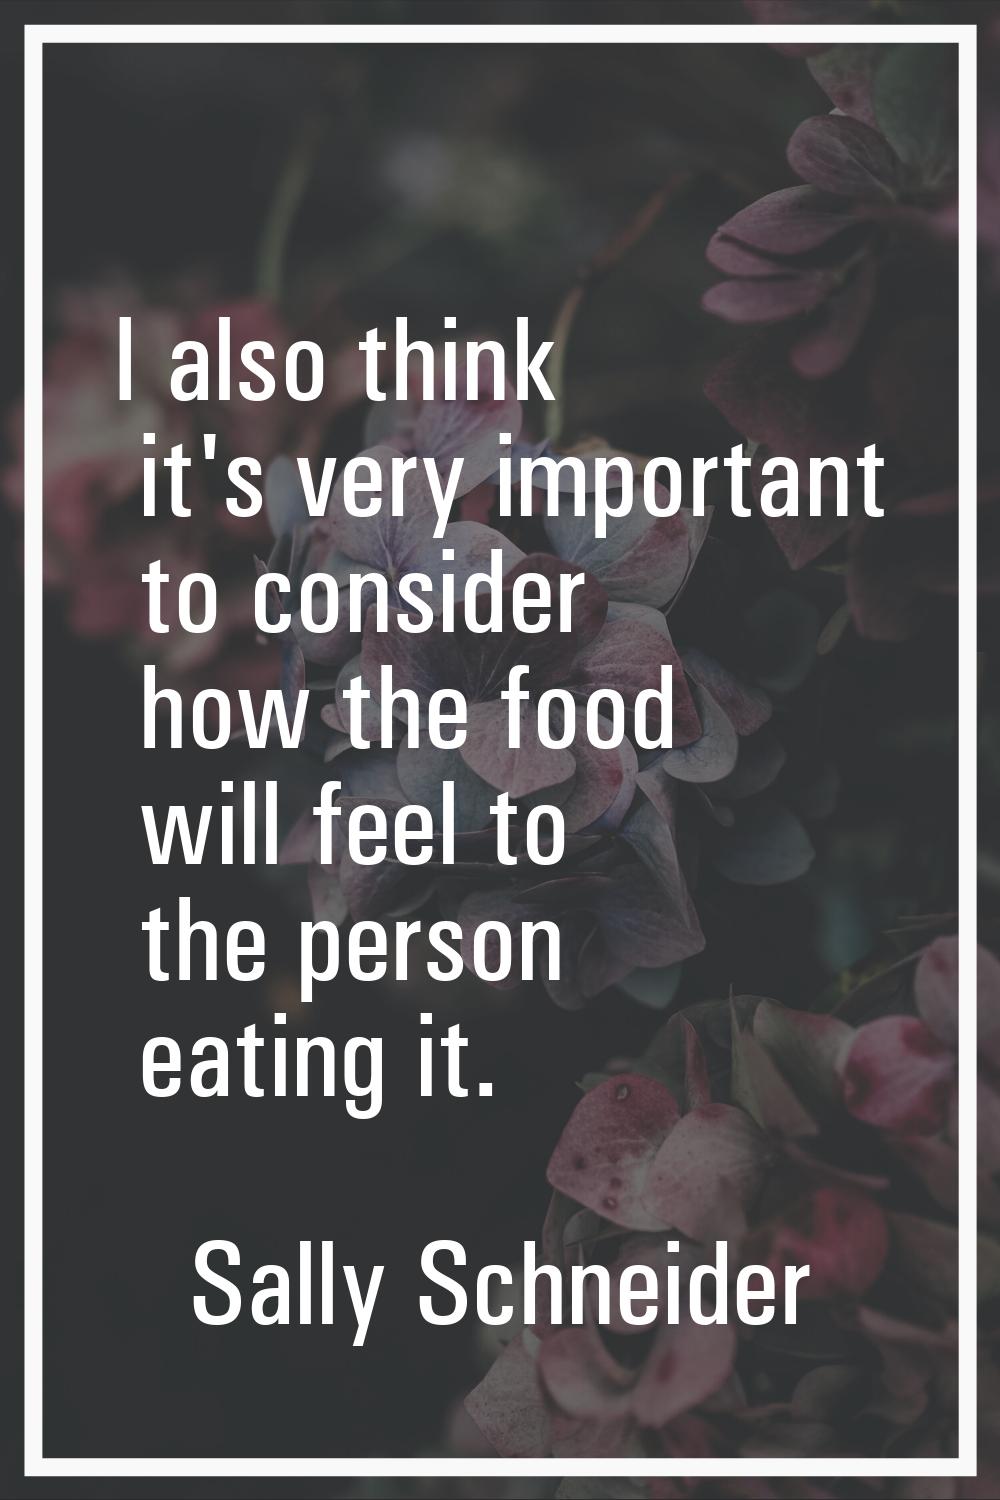 I also think it's very important to consider how the food will feel to the person eating it.